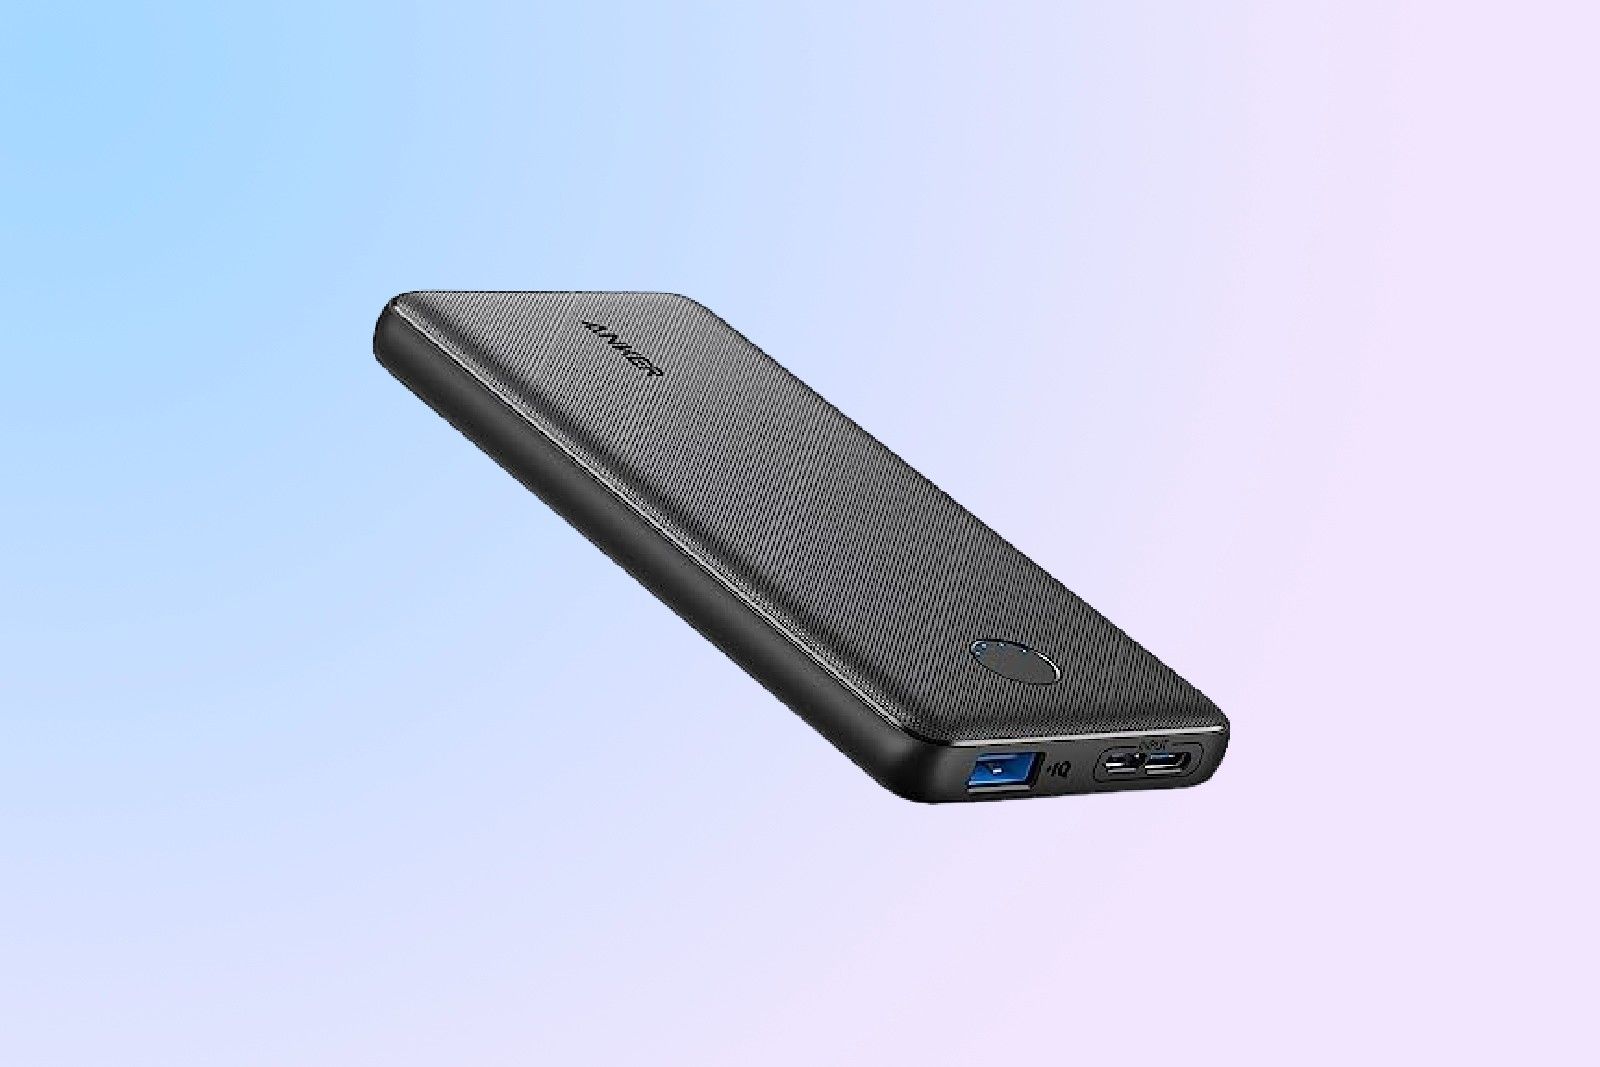 Anker power bank on gradient background